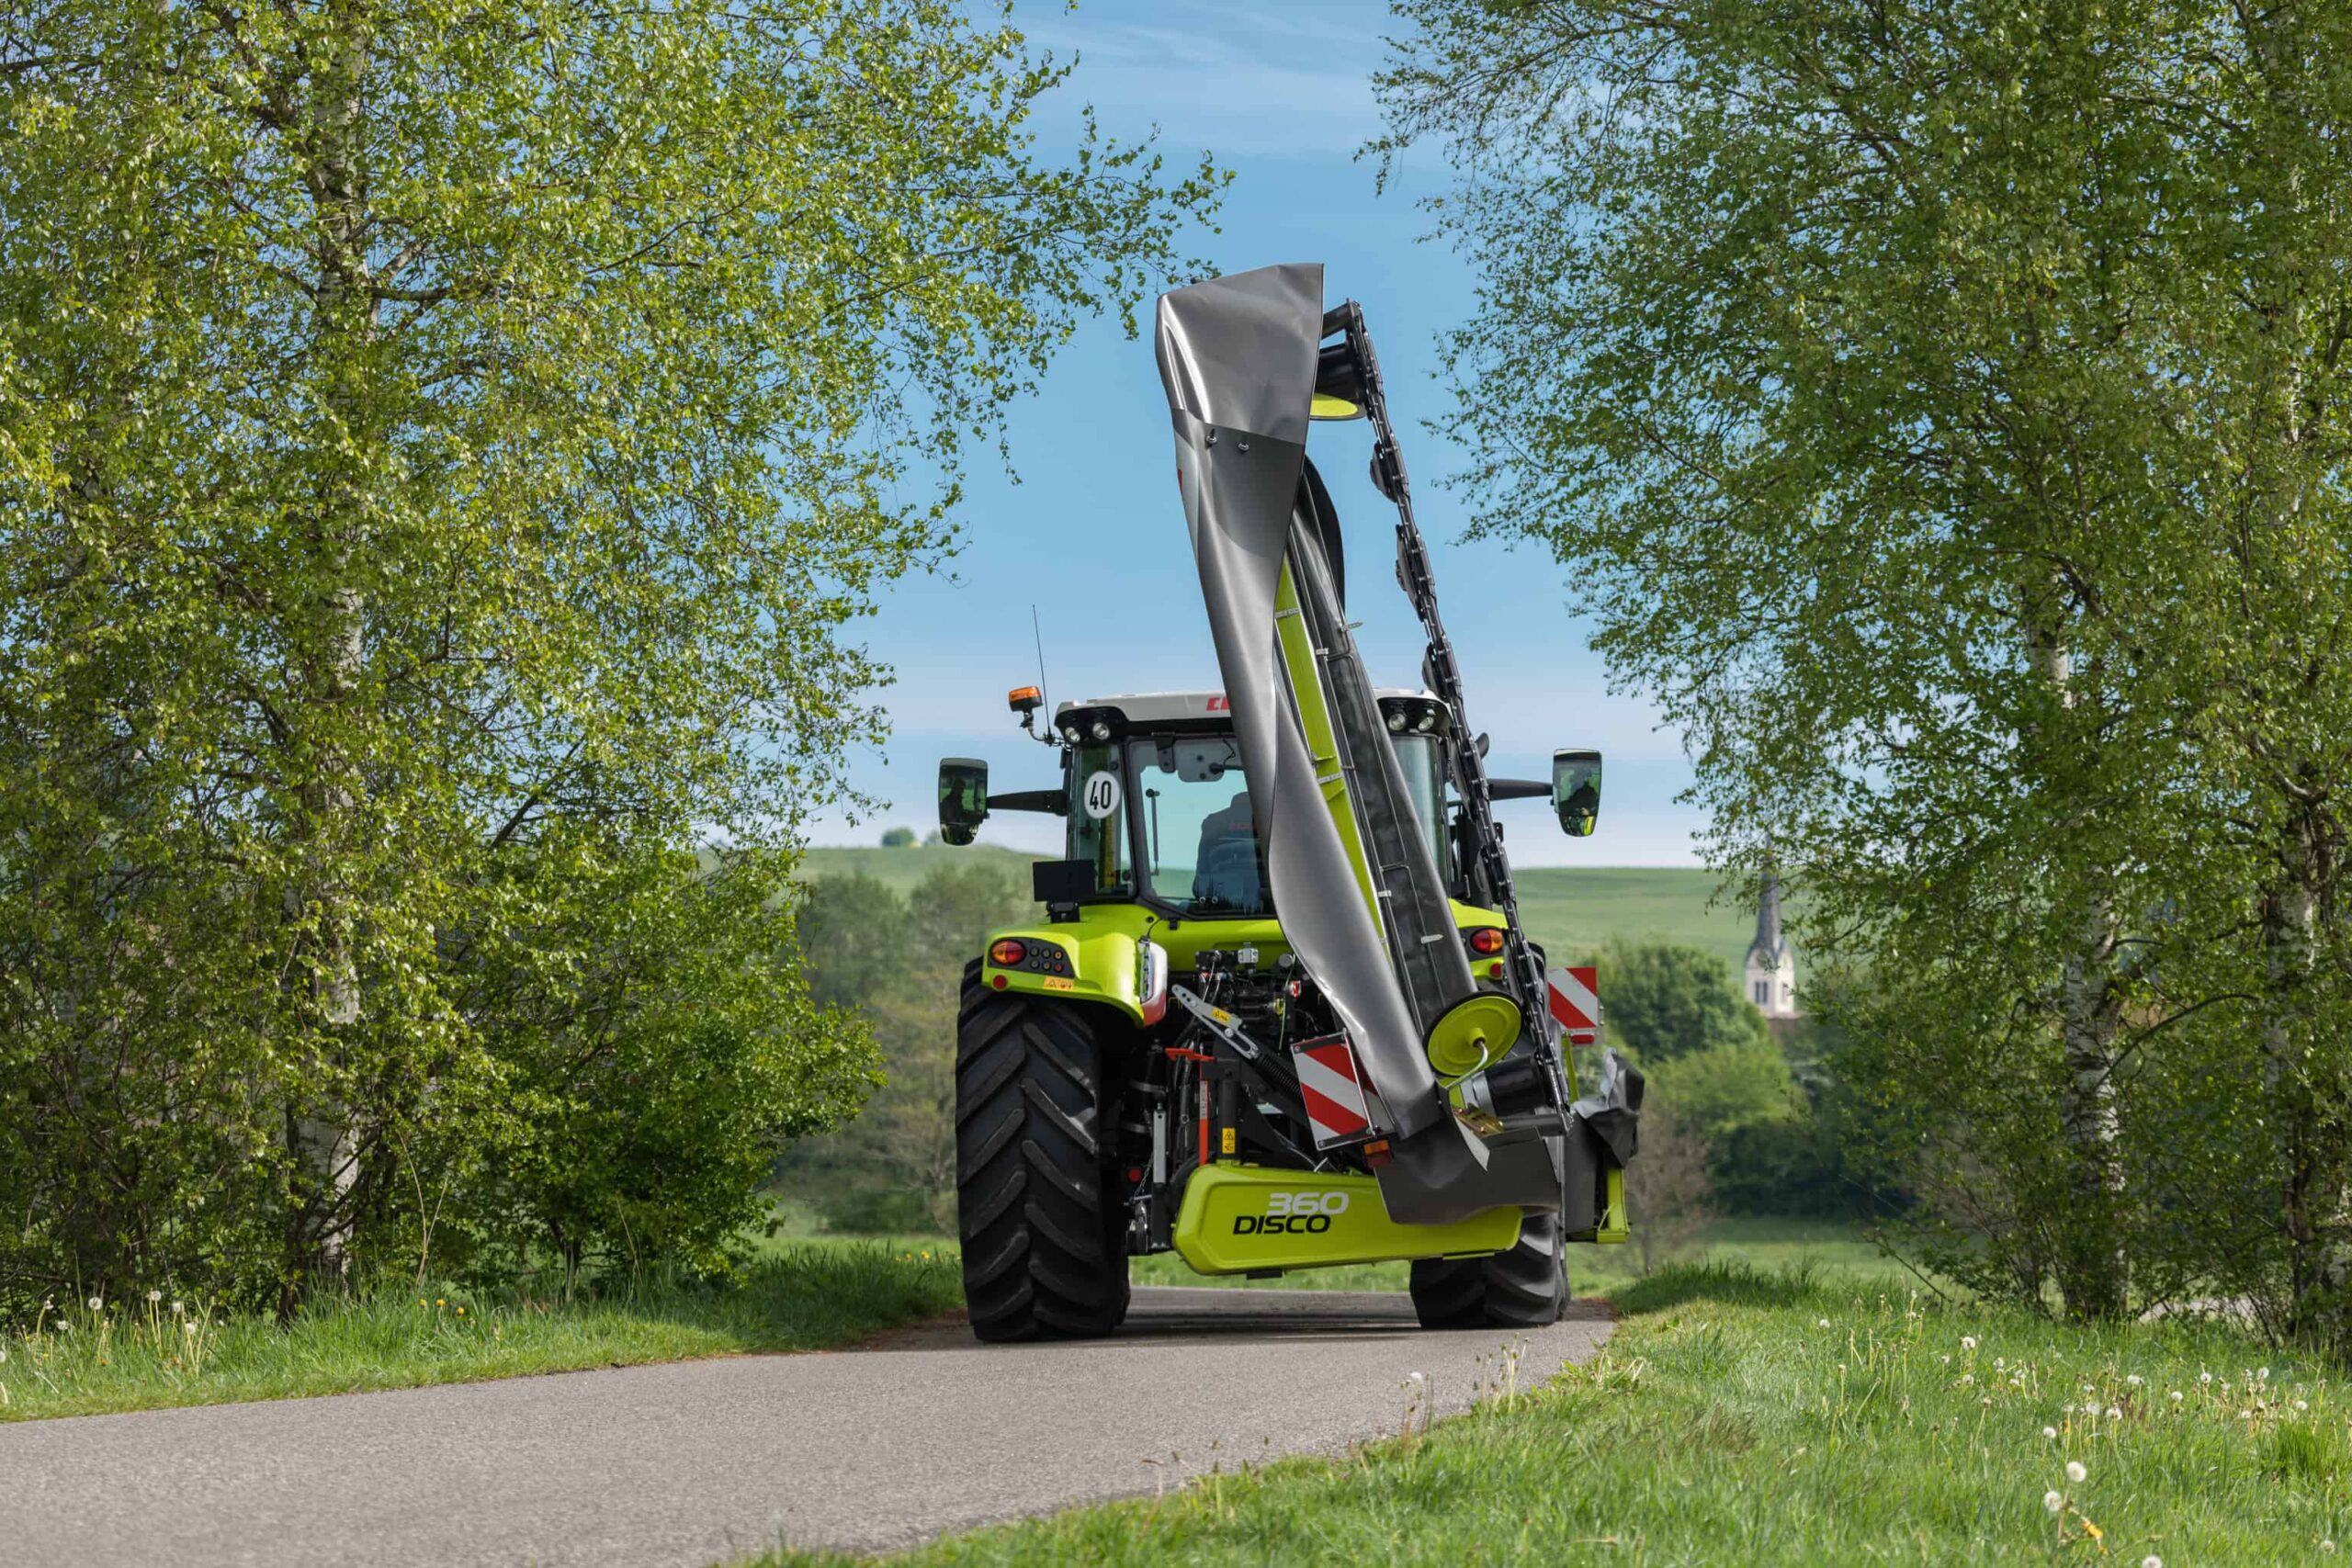 Two new ranges of rear mower